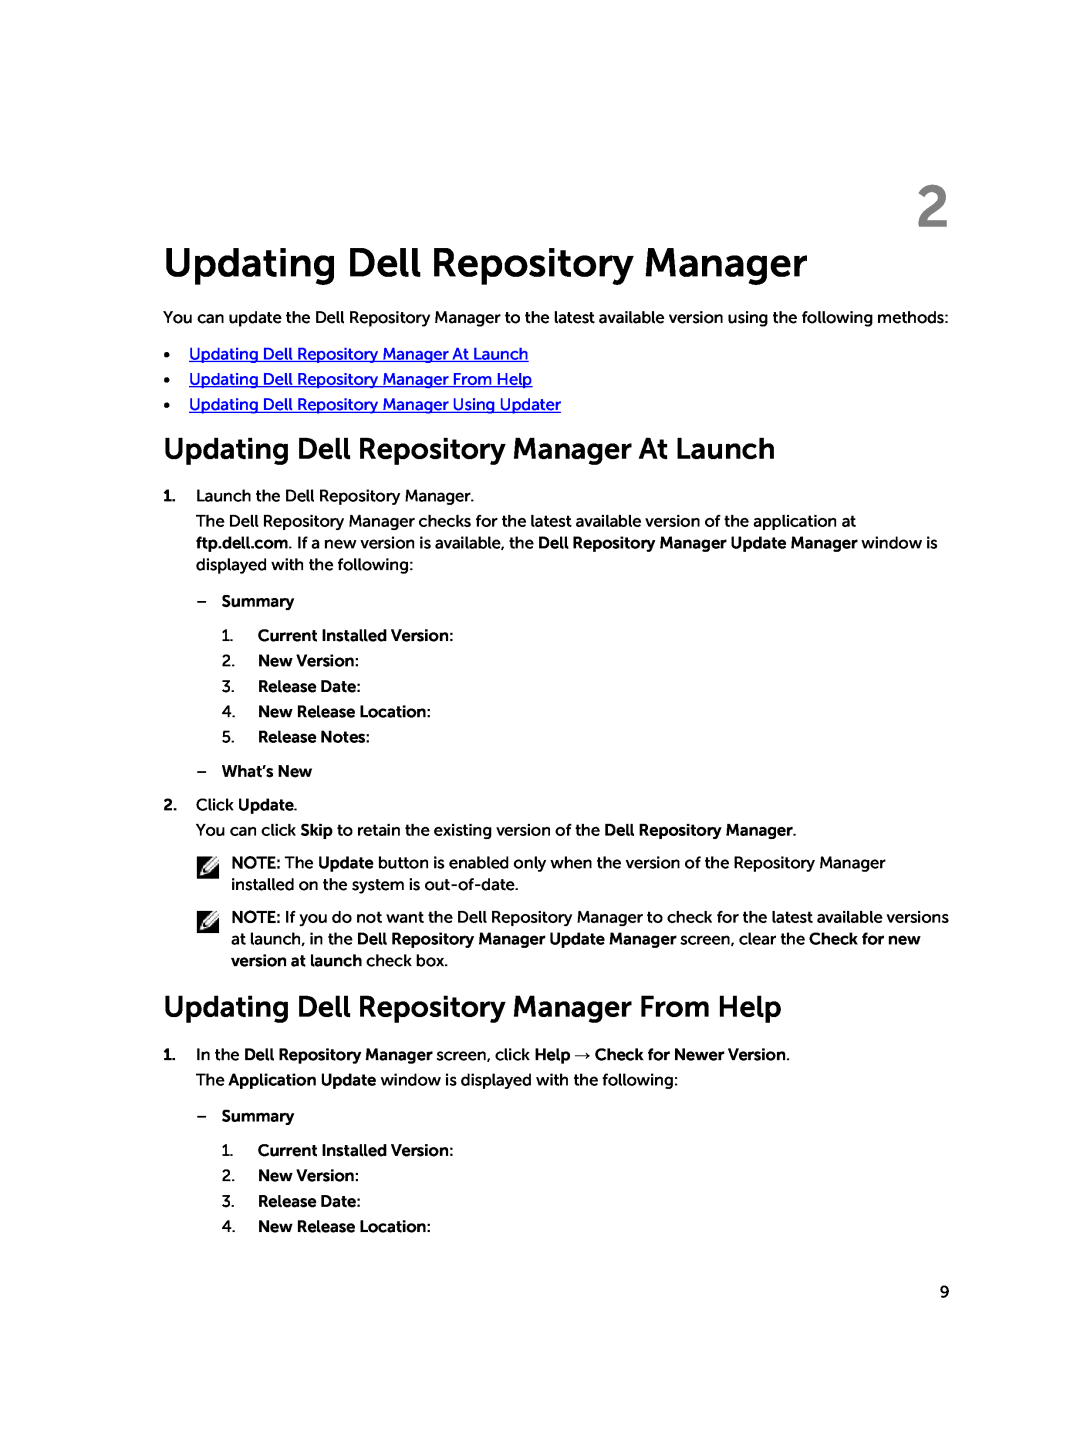 Dell 1.8 manual Updating Dell Repository Manager At Launch, Updating Dell Repository Manager From Help 